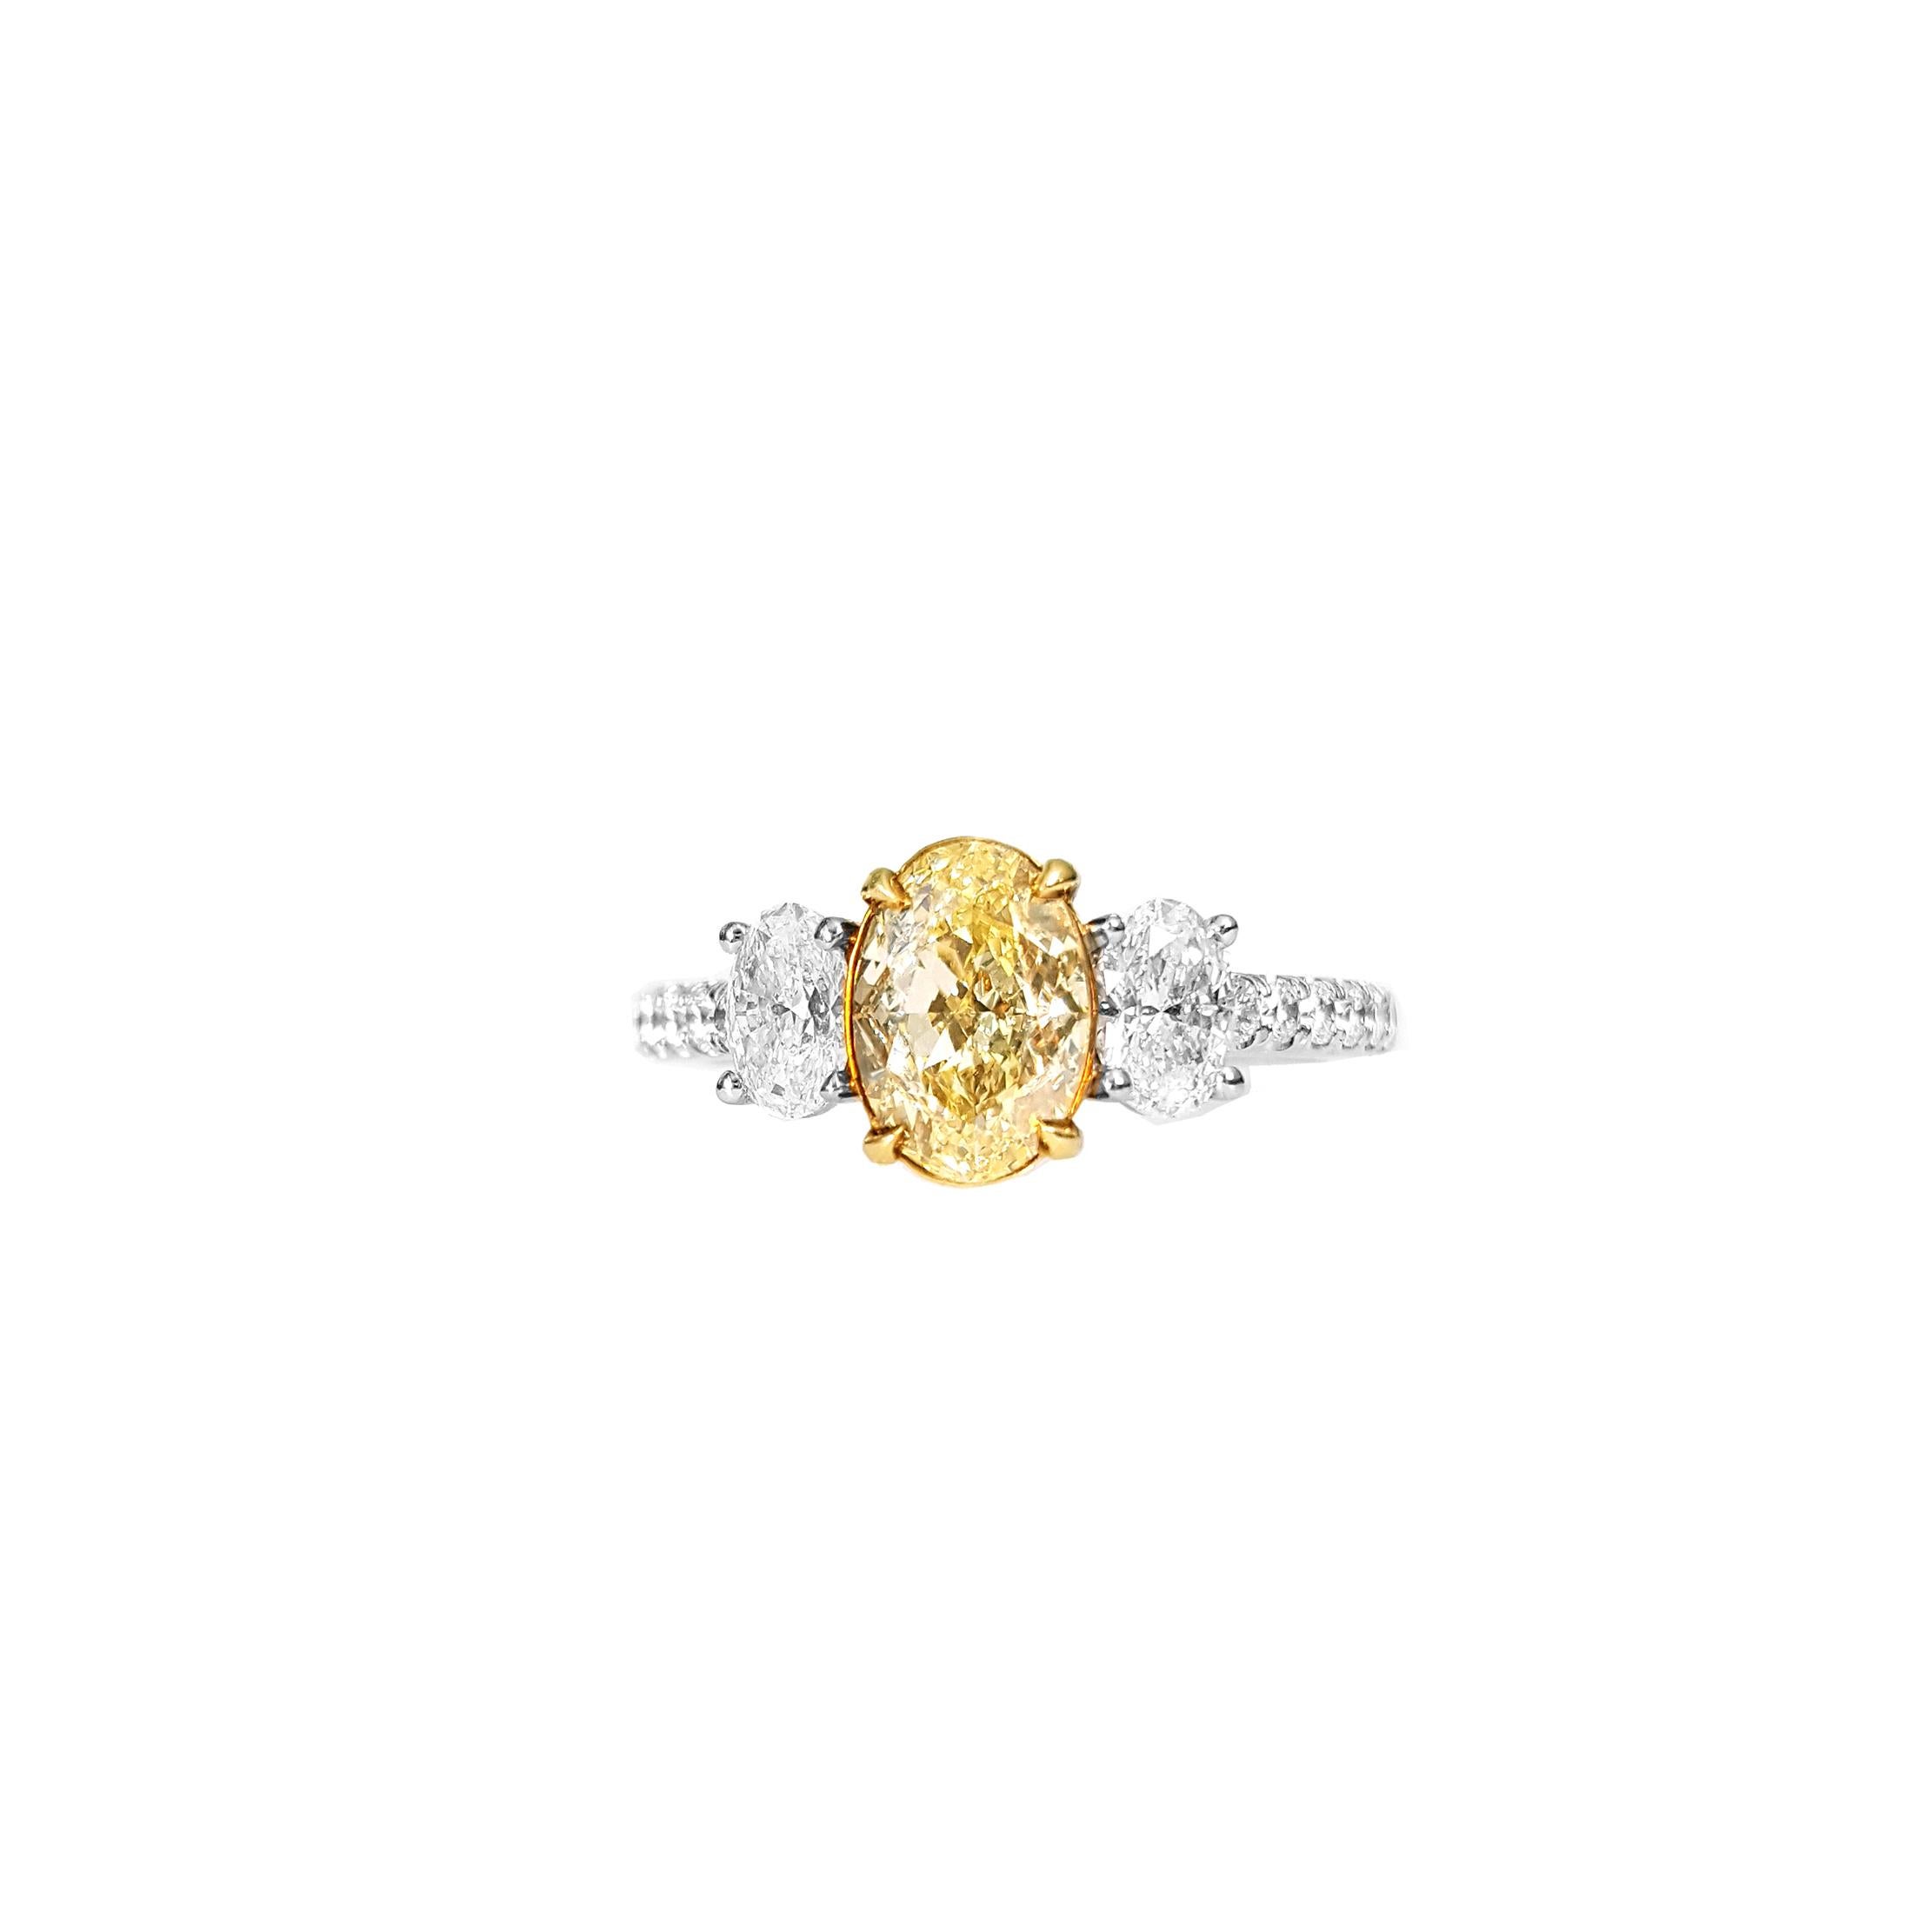 Contemporary 1.30 Carat Fancy Yellow Oval Diamond Three-Stone Engagement Ring, GIA Certified. For Sale